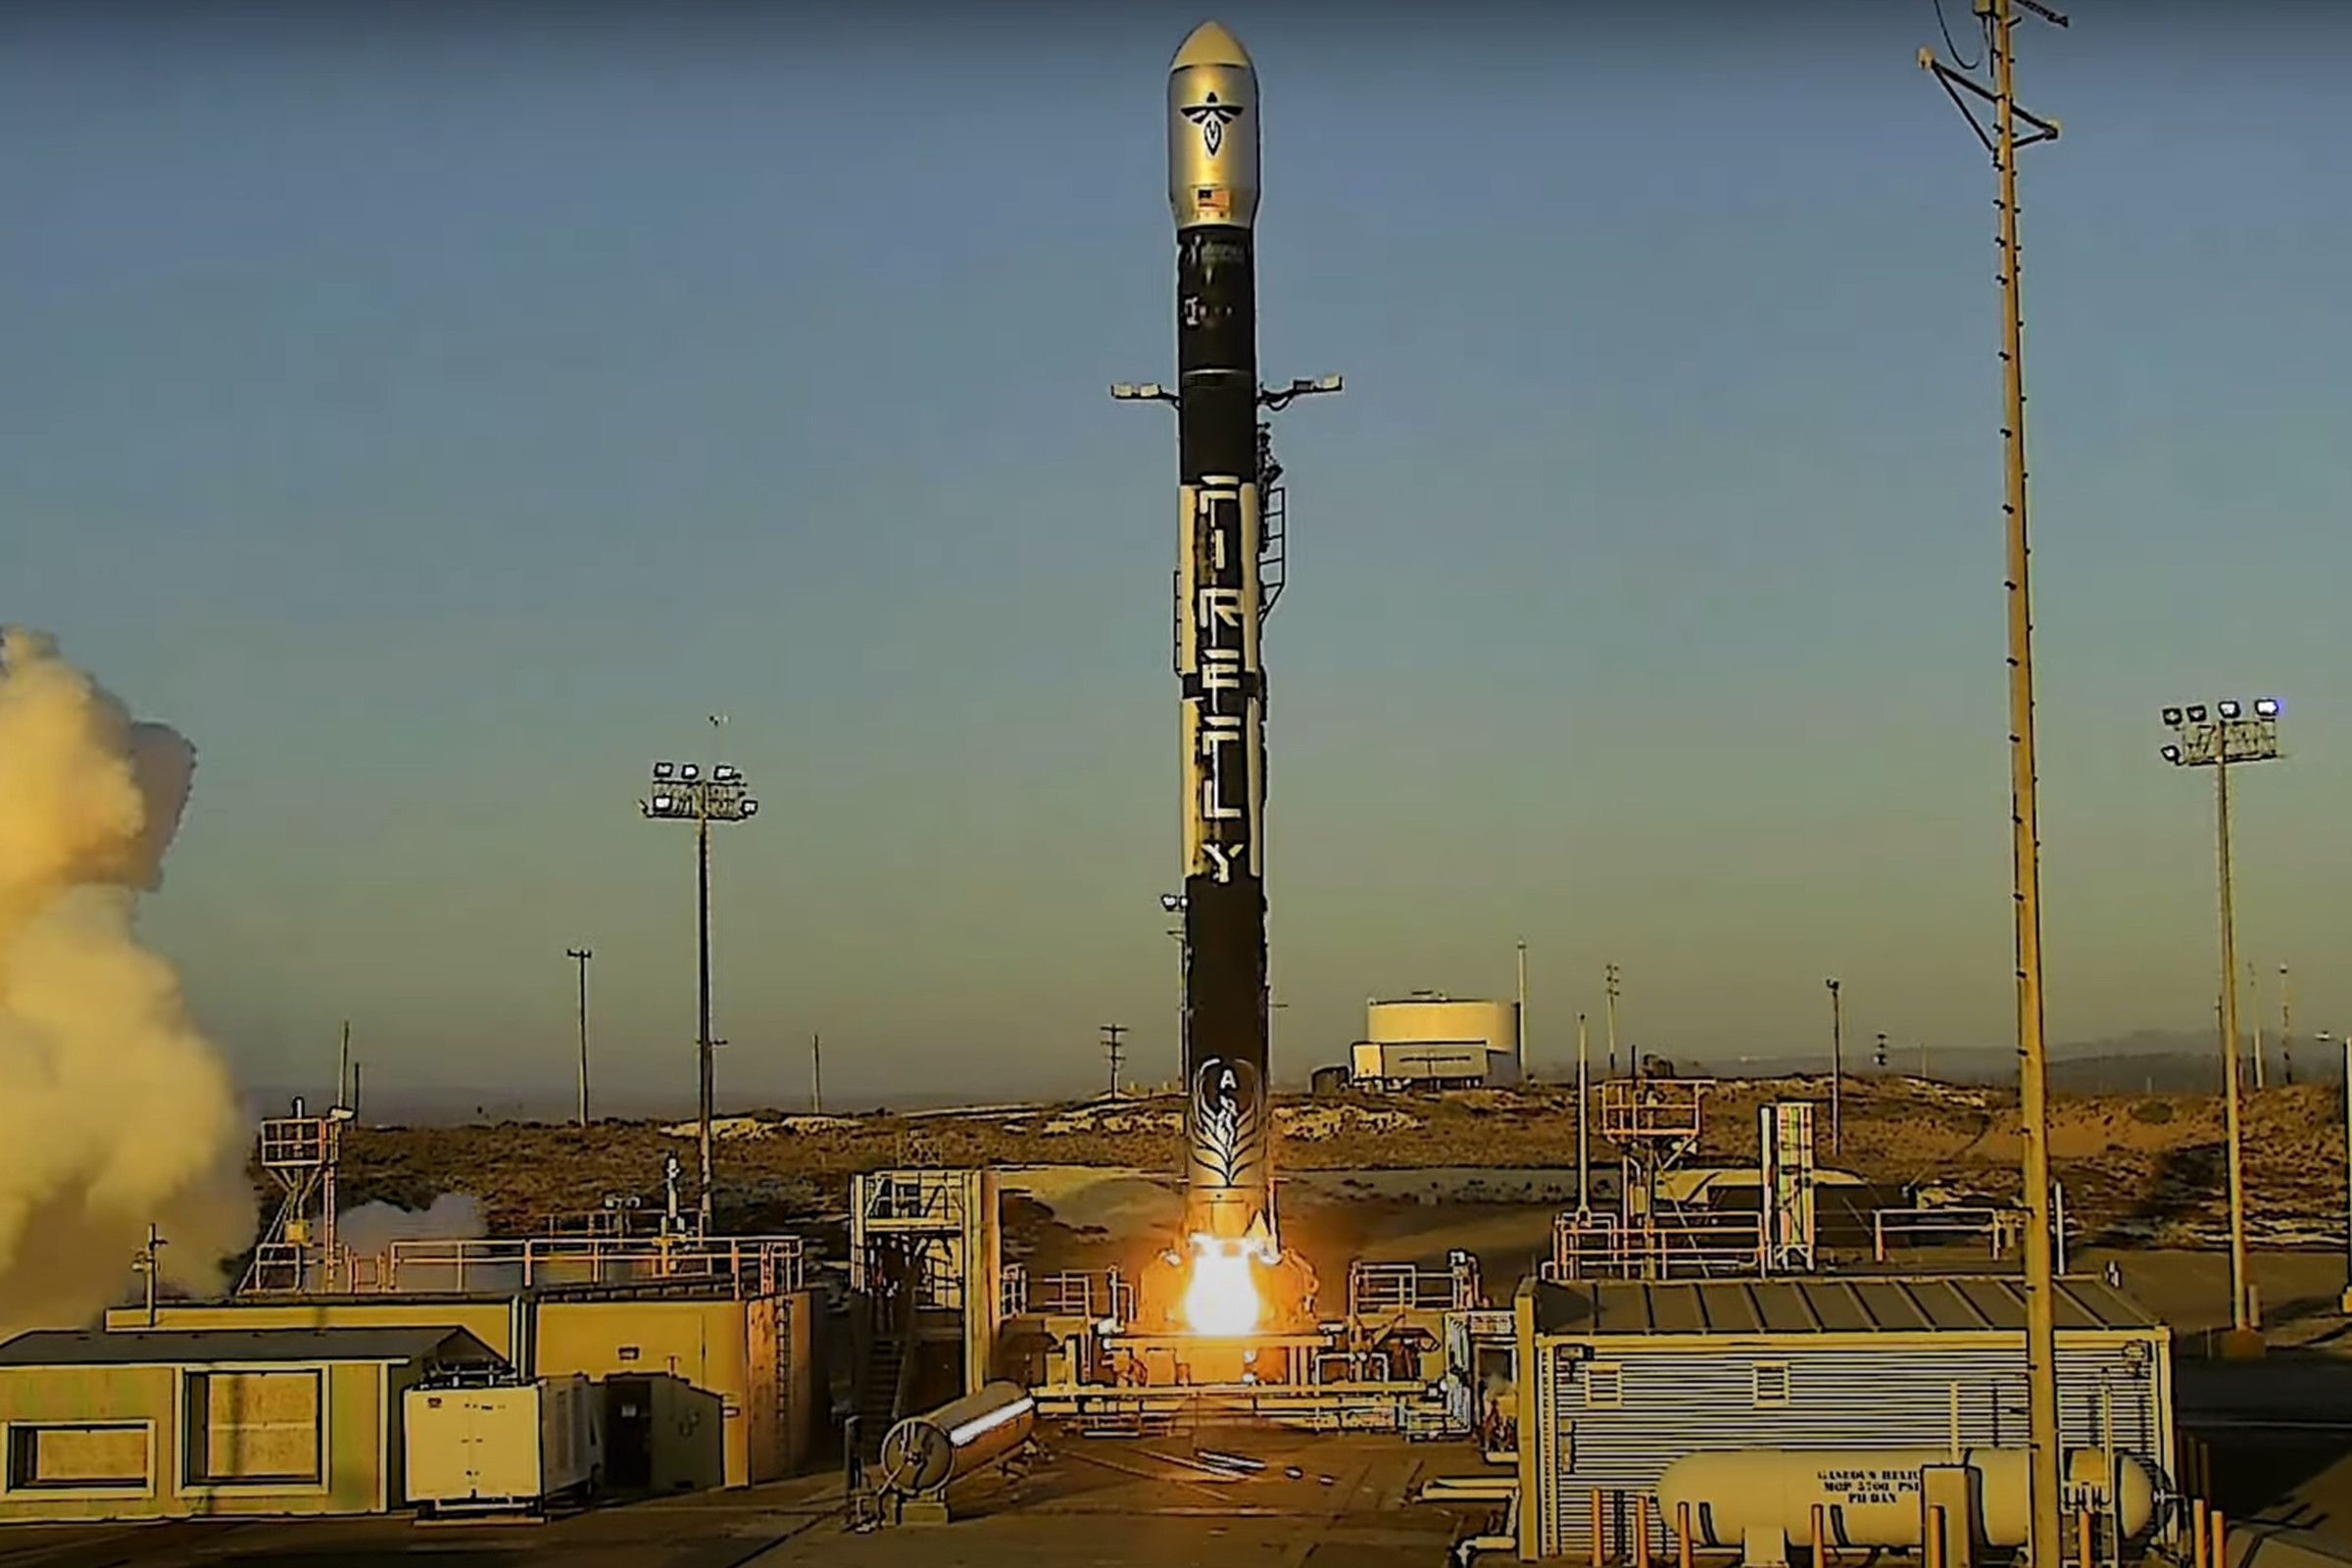 Firefly’s Alpha rocket takes off from Vandenberg Space Force base  on September 3rd